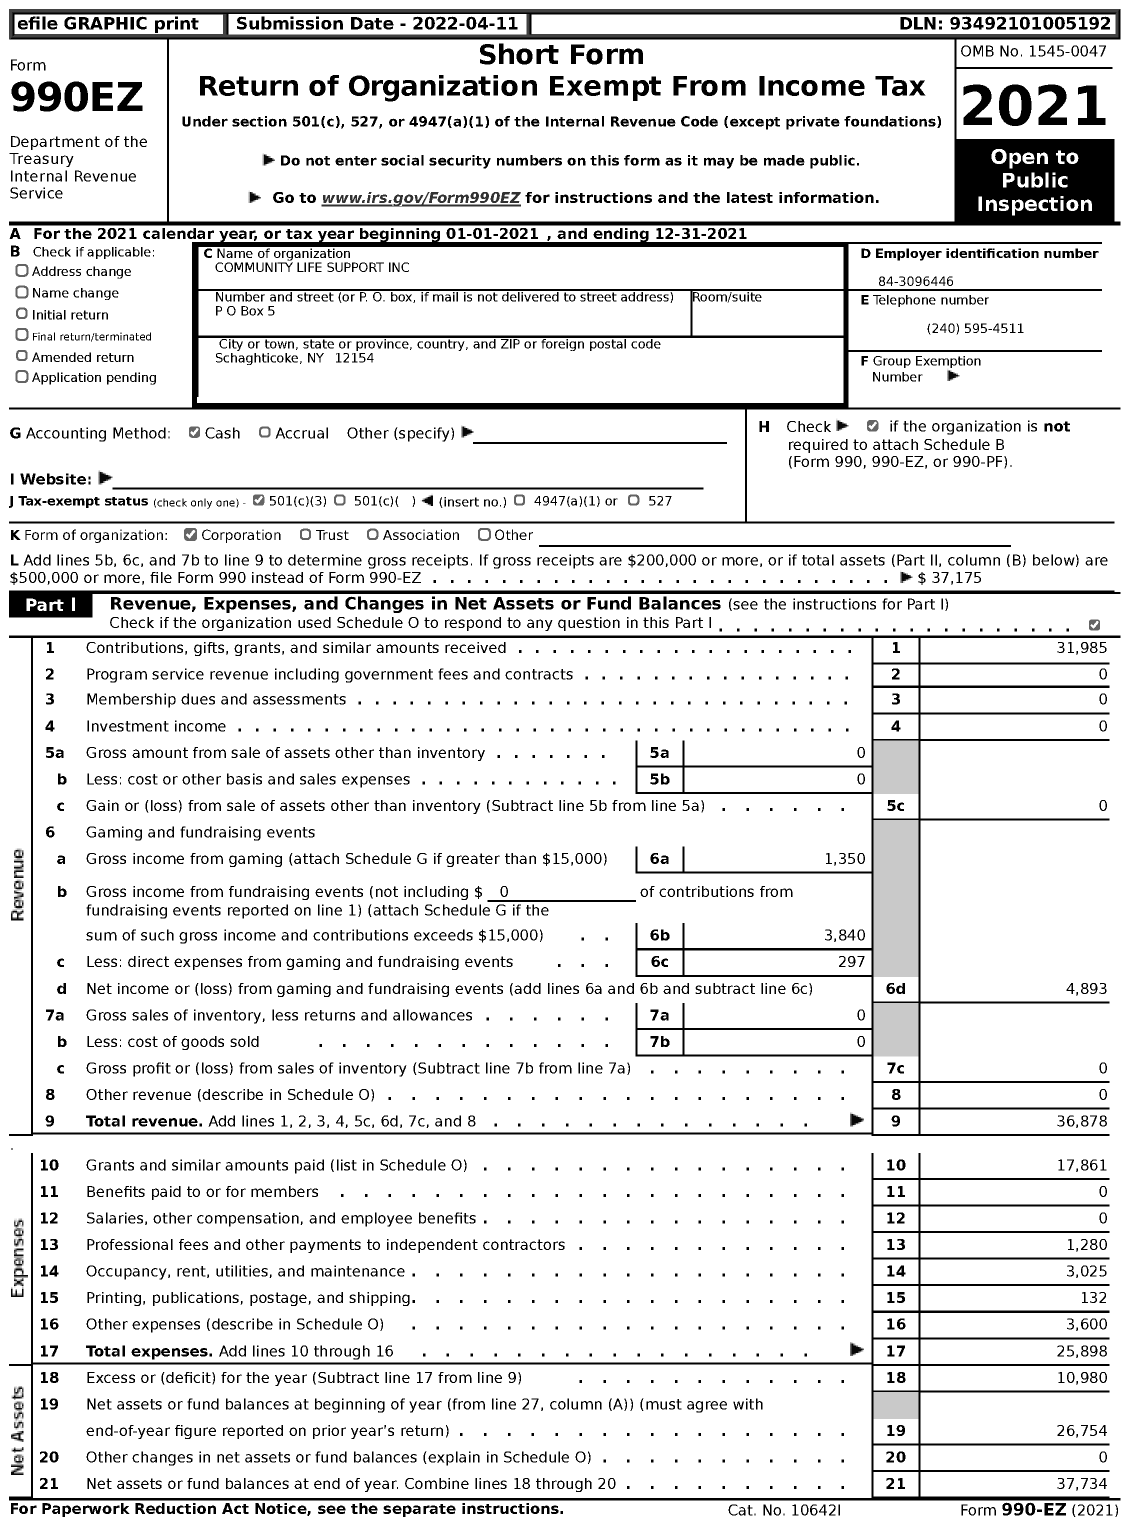 Image of first page of 2021 Form 990EZ for Community Life Support